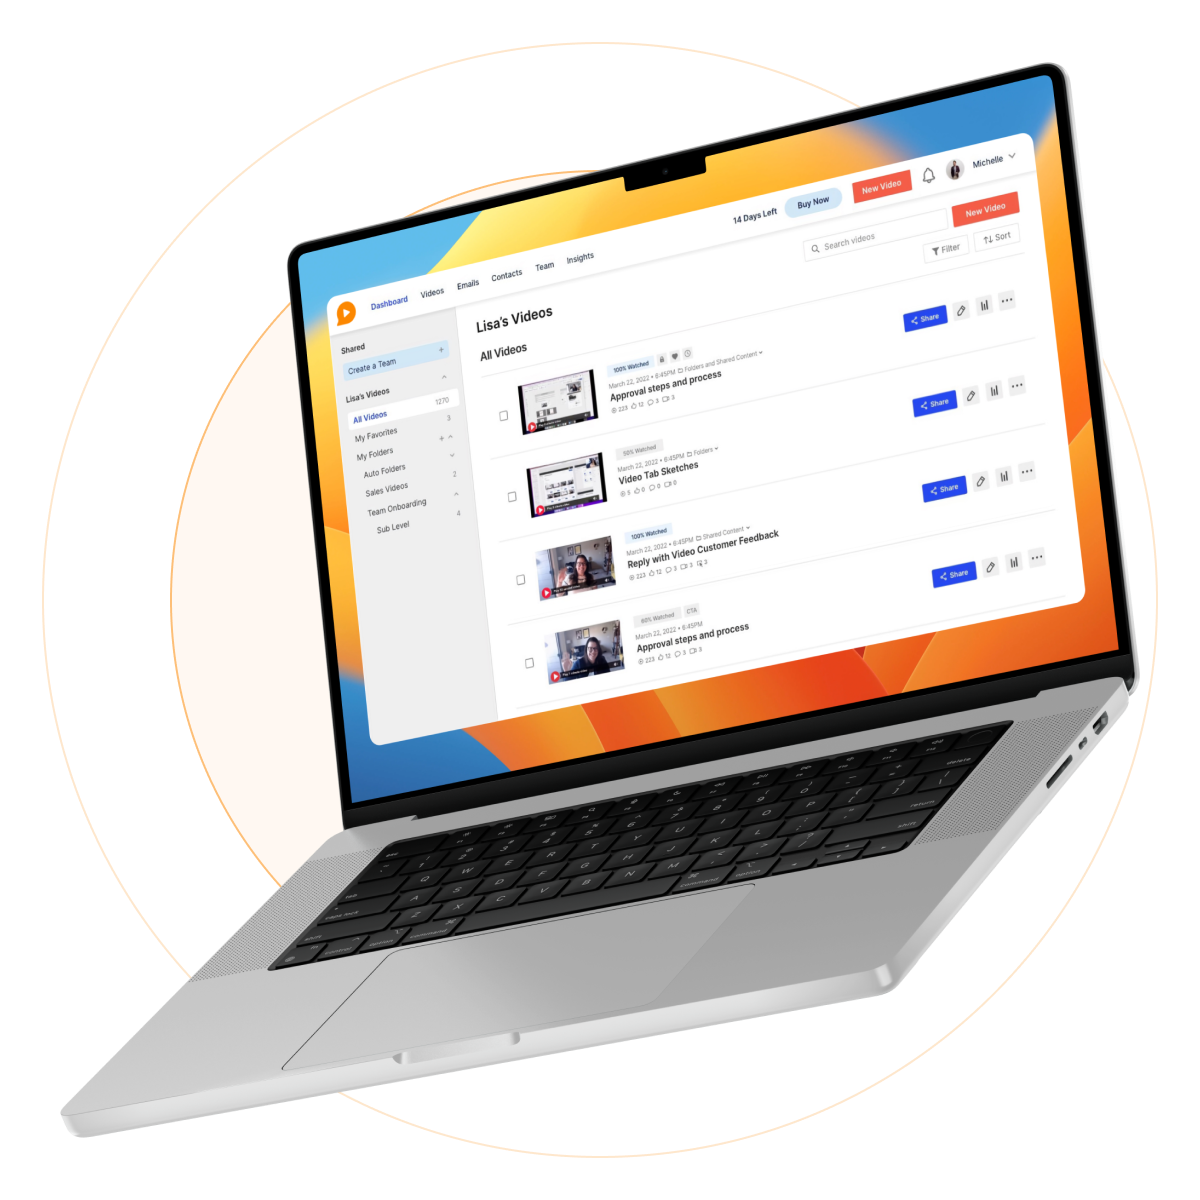 Laptop screen displaying a user interface for managing video content. The interface includes tabs like Dashboard, Team, and Videos, indicating a platform organized to enhance teamwork and content management.